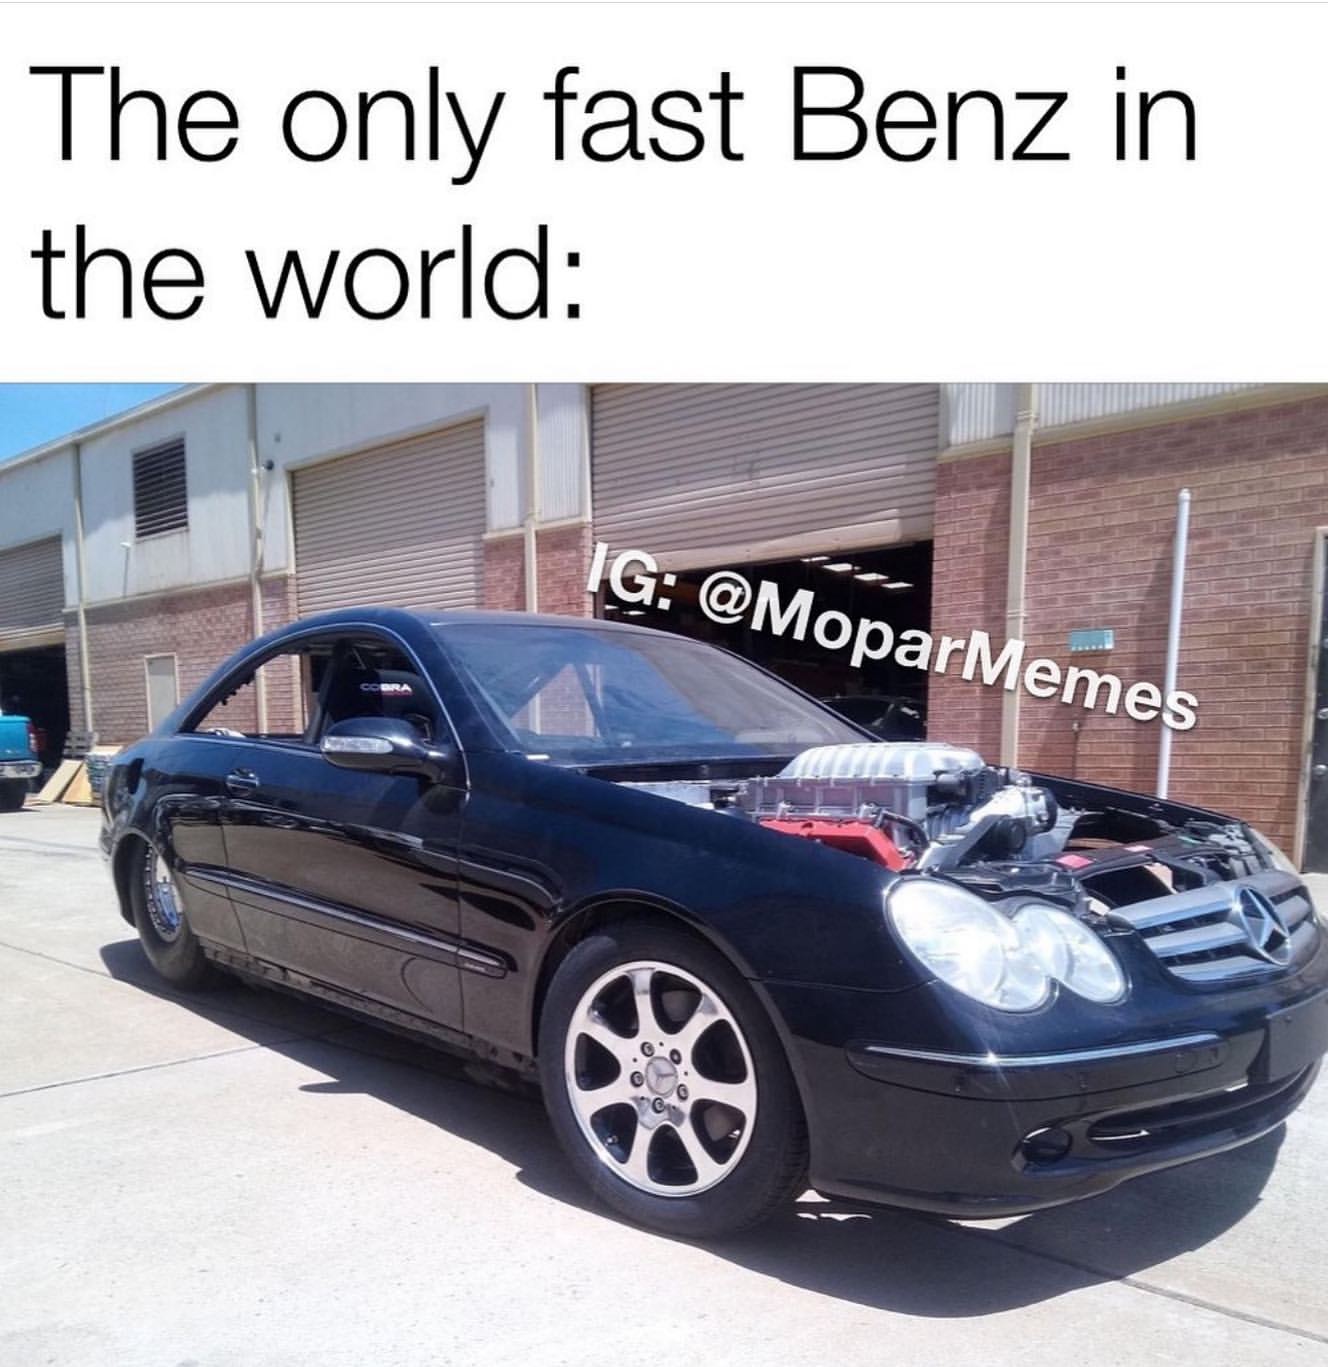 The only fast Benz in the world: